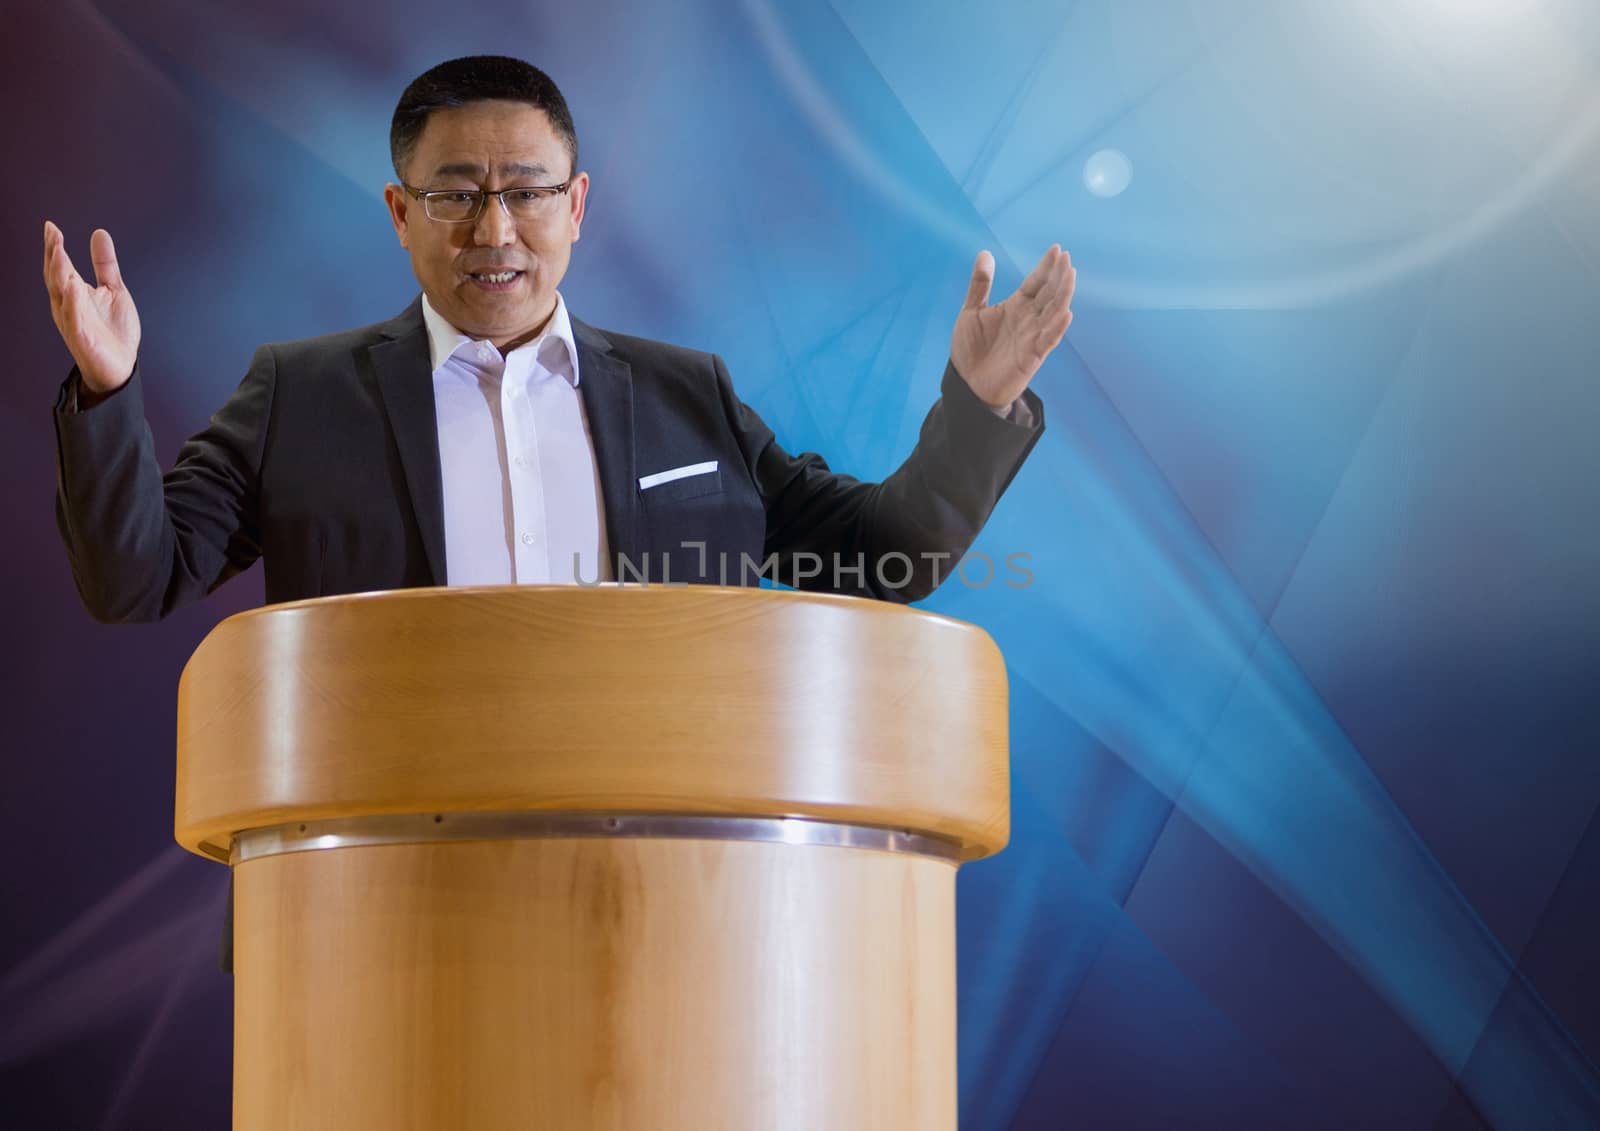 Digital composite of Businessman on podium speaking at conference with abstract background